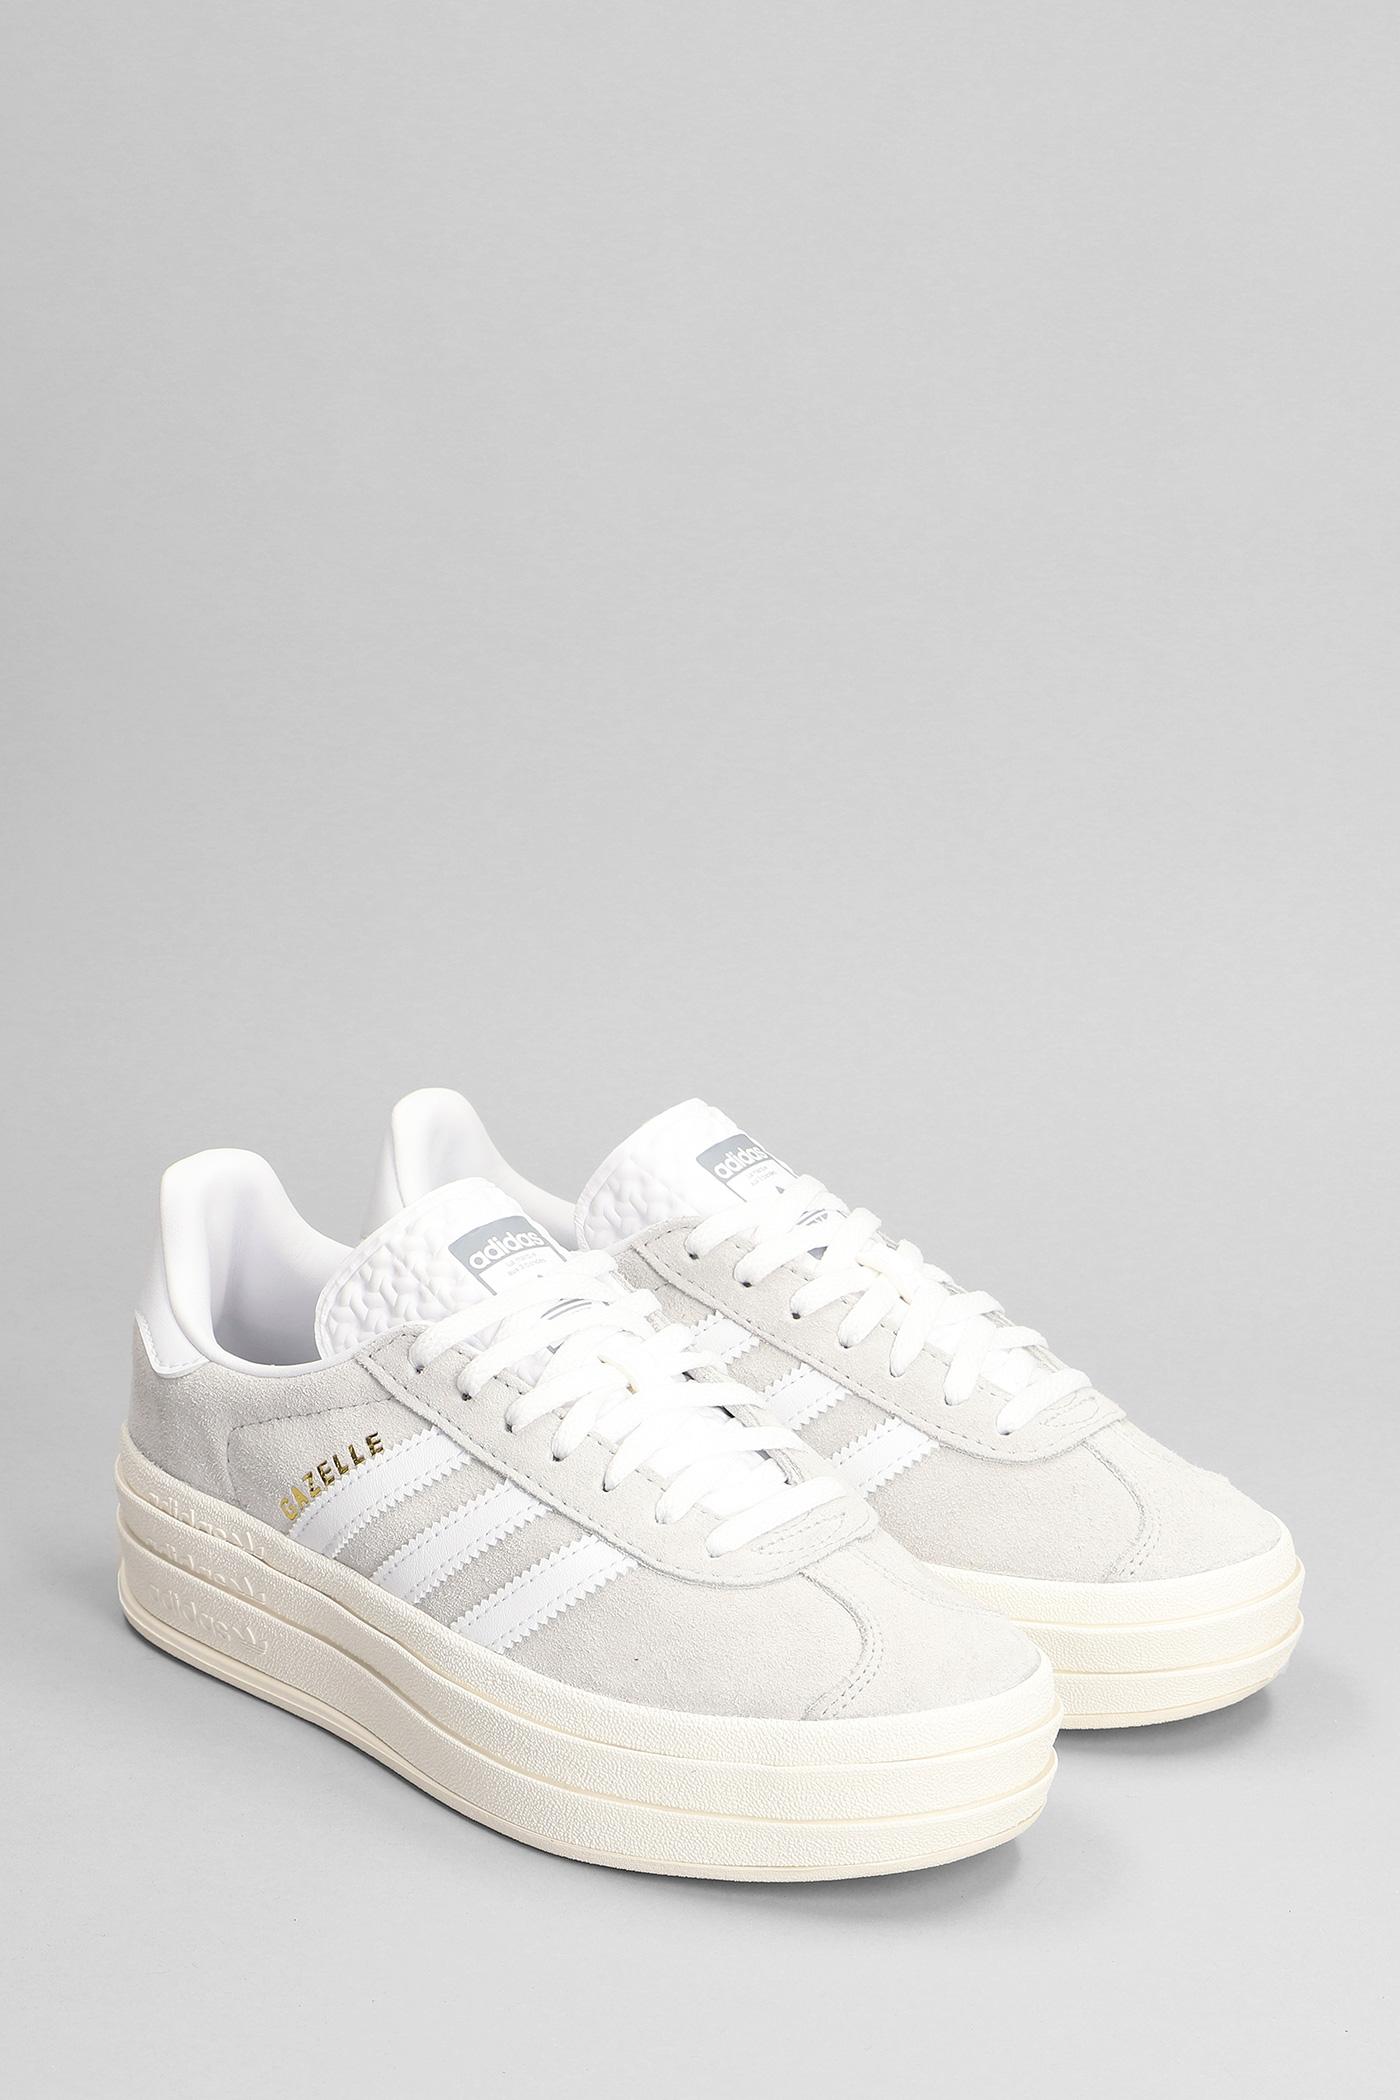 adidas Gazelle Bold Sneakers In Grey Suede in White | Lyst